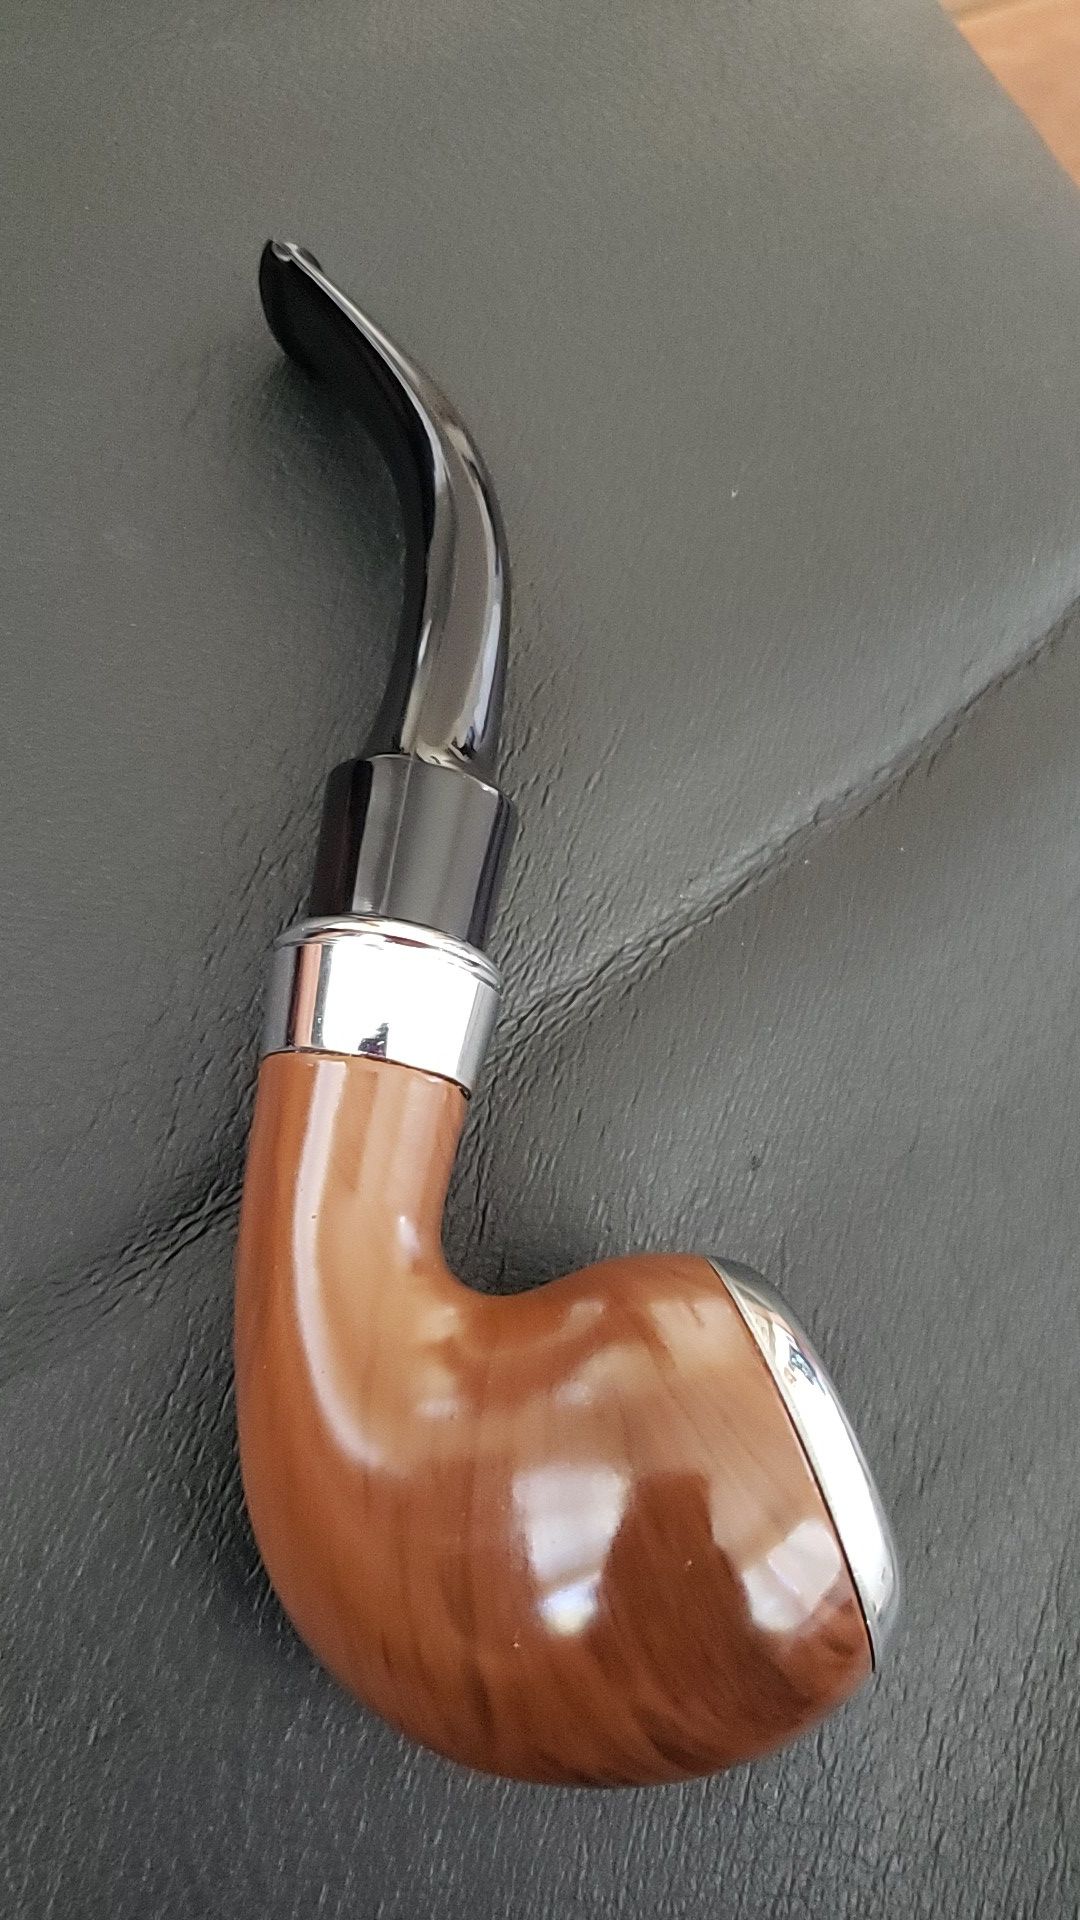 Brand new Tobacco Pipe with black carrying case